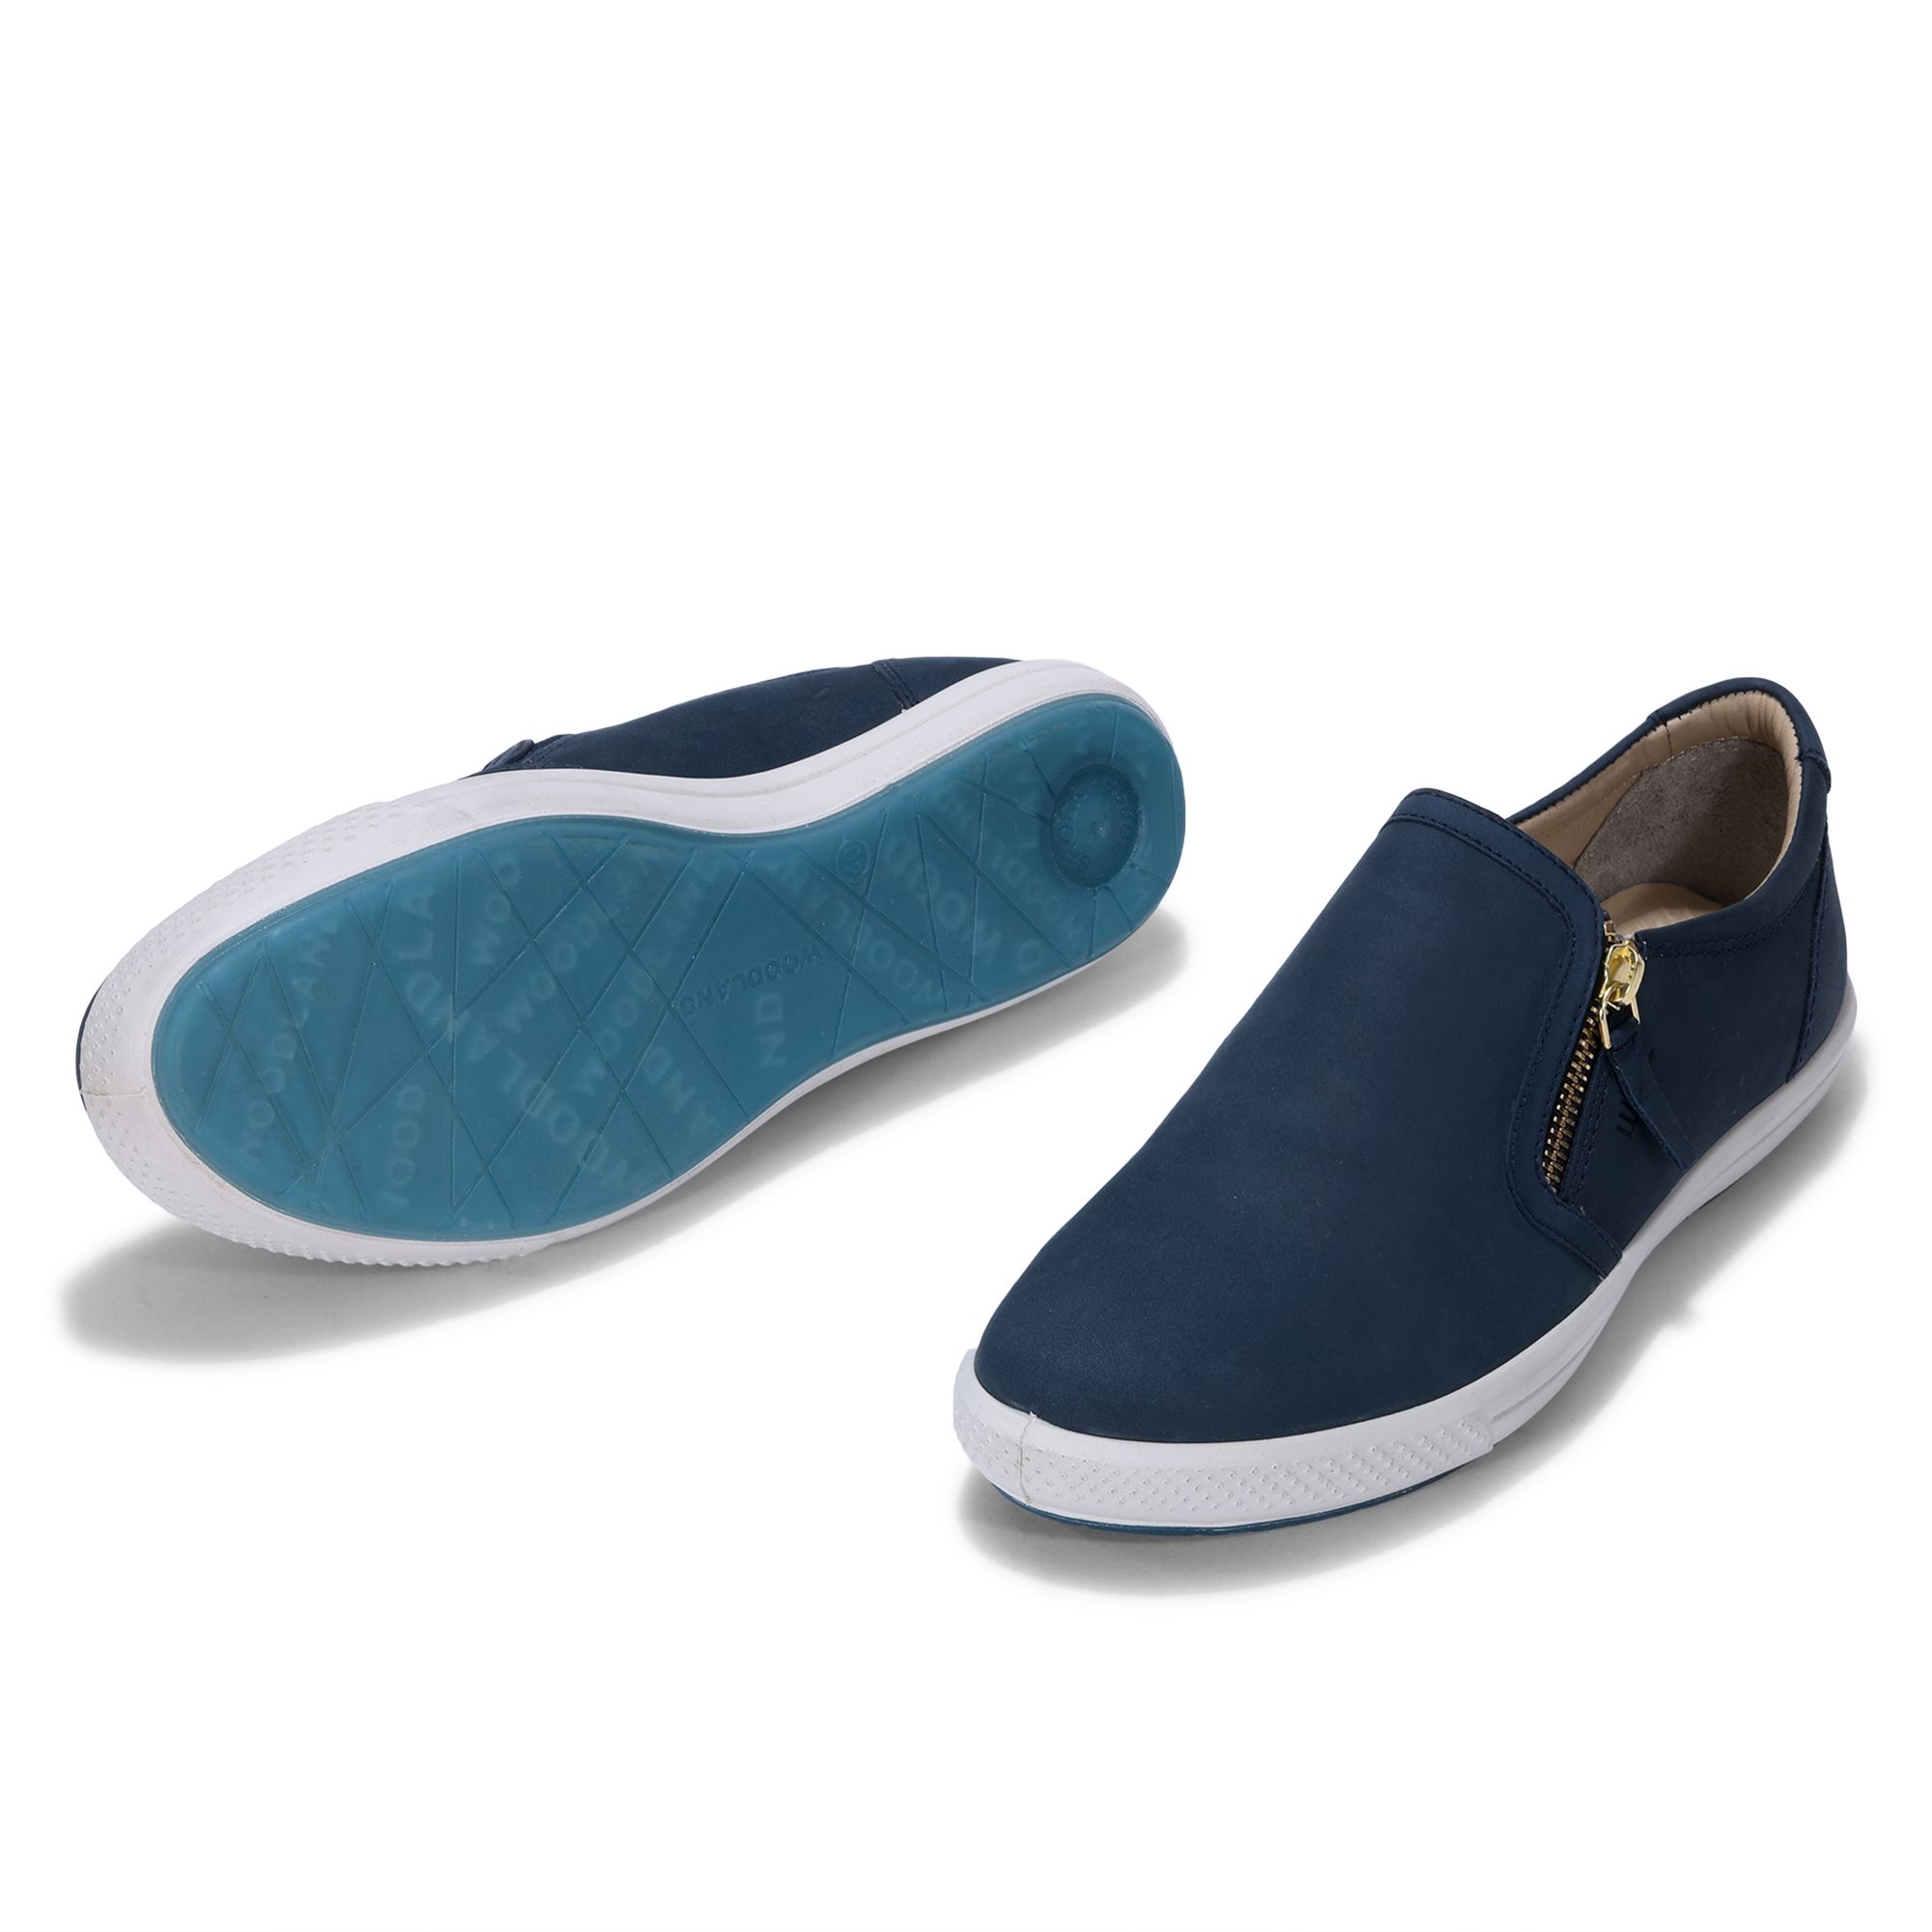 Woodland droyal blue Slip-on shoes for women